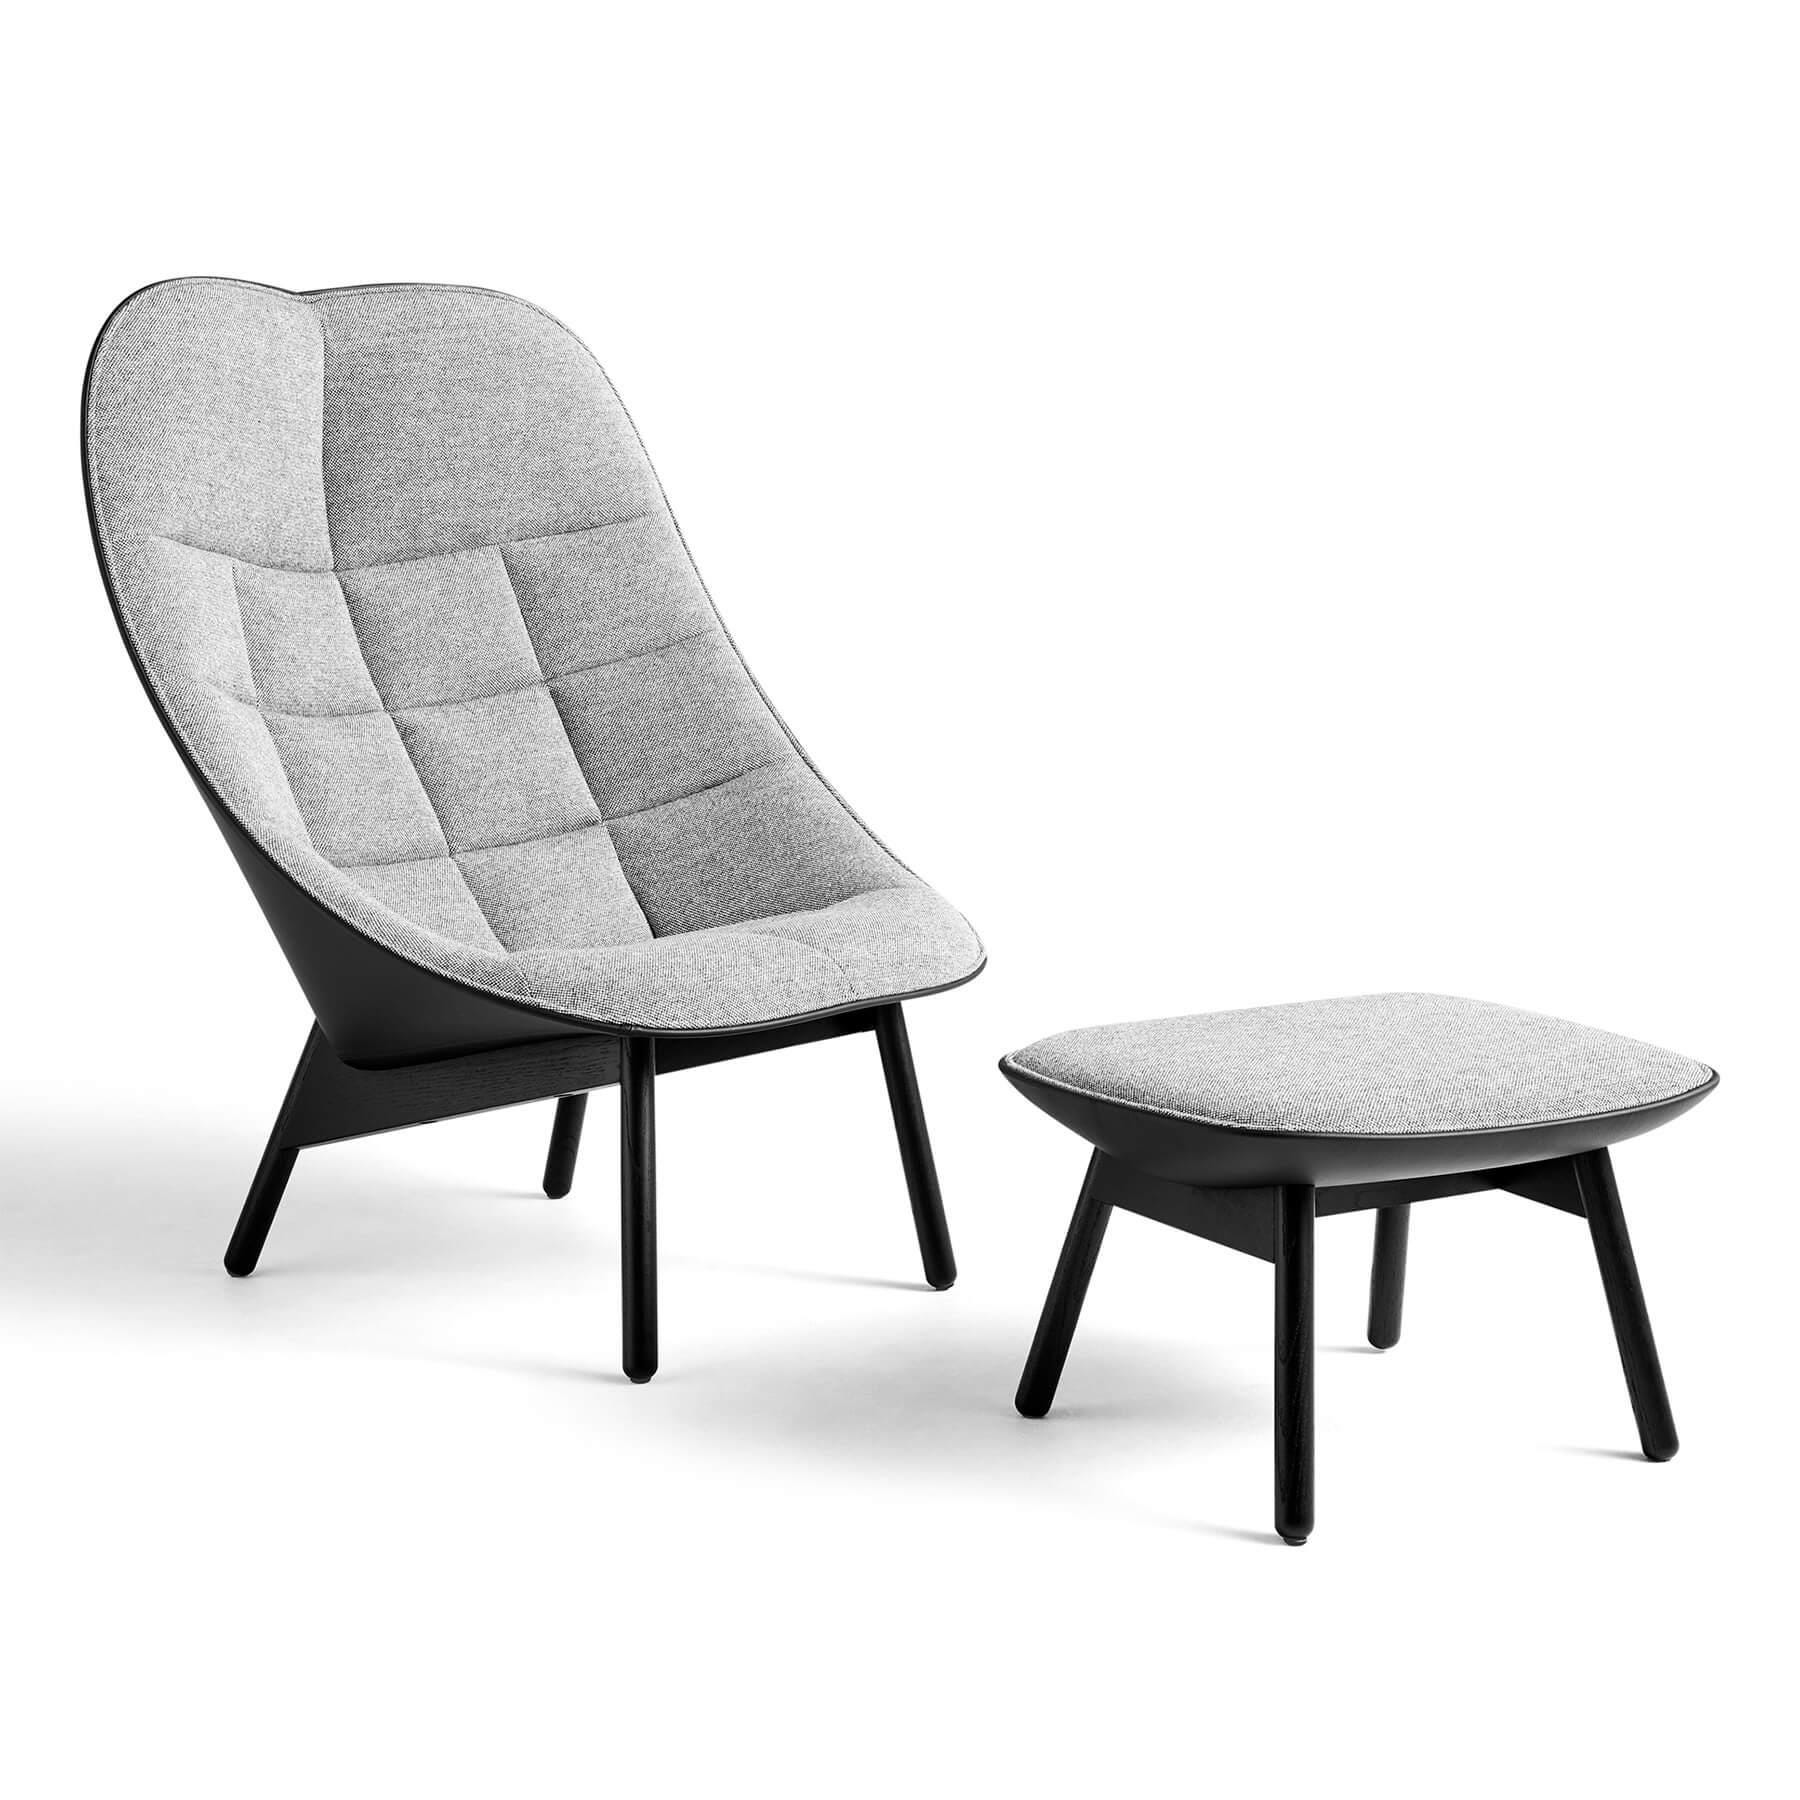 Hay Uchiwa Lounge Chair Quilted Hallingdal 126 Sierra Si1001 Black Oak Base With Ottoman Grey Designer Furniture From Holloways Of Ludlow